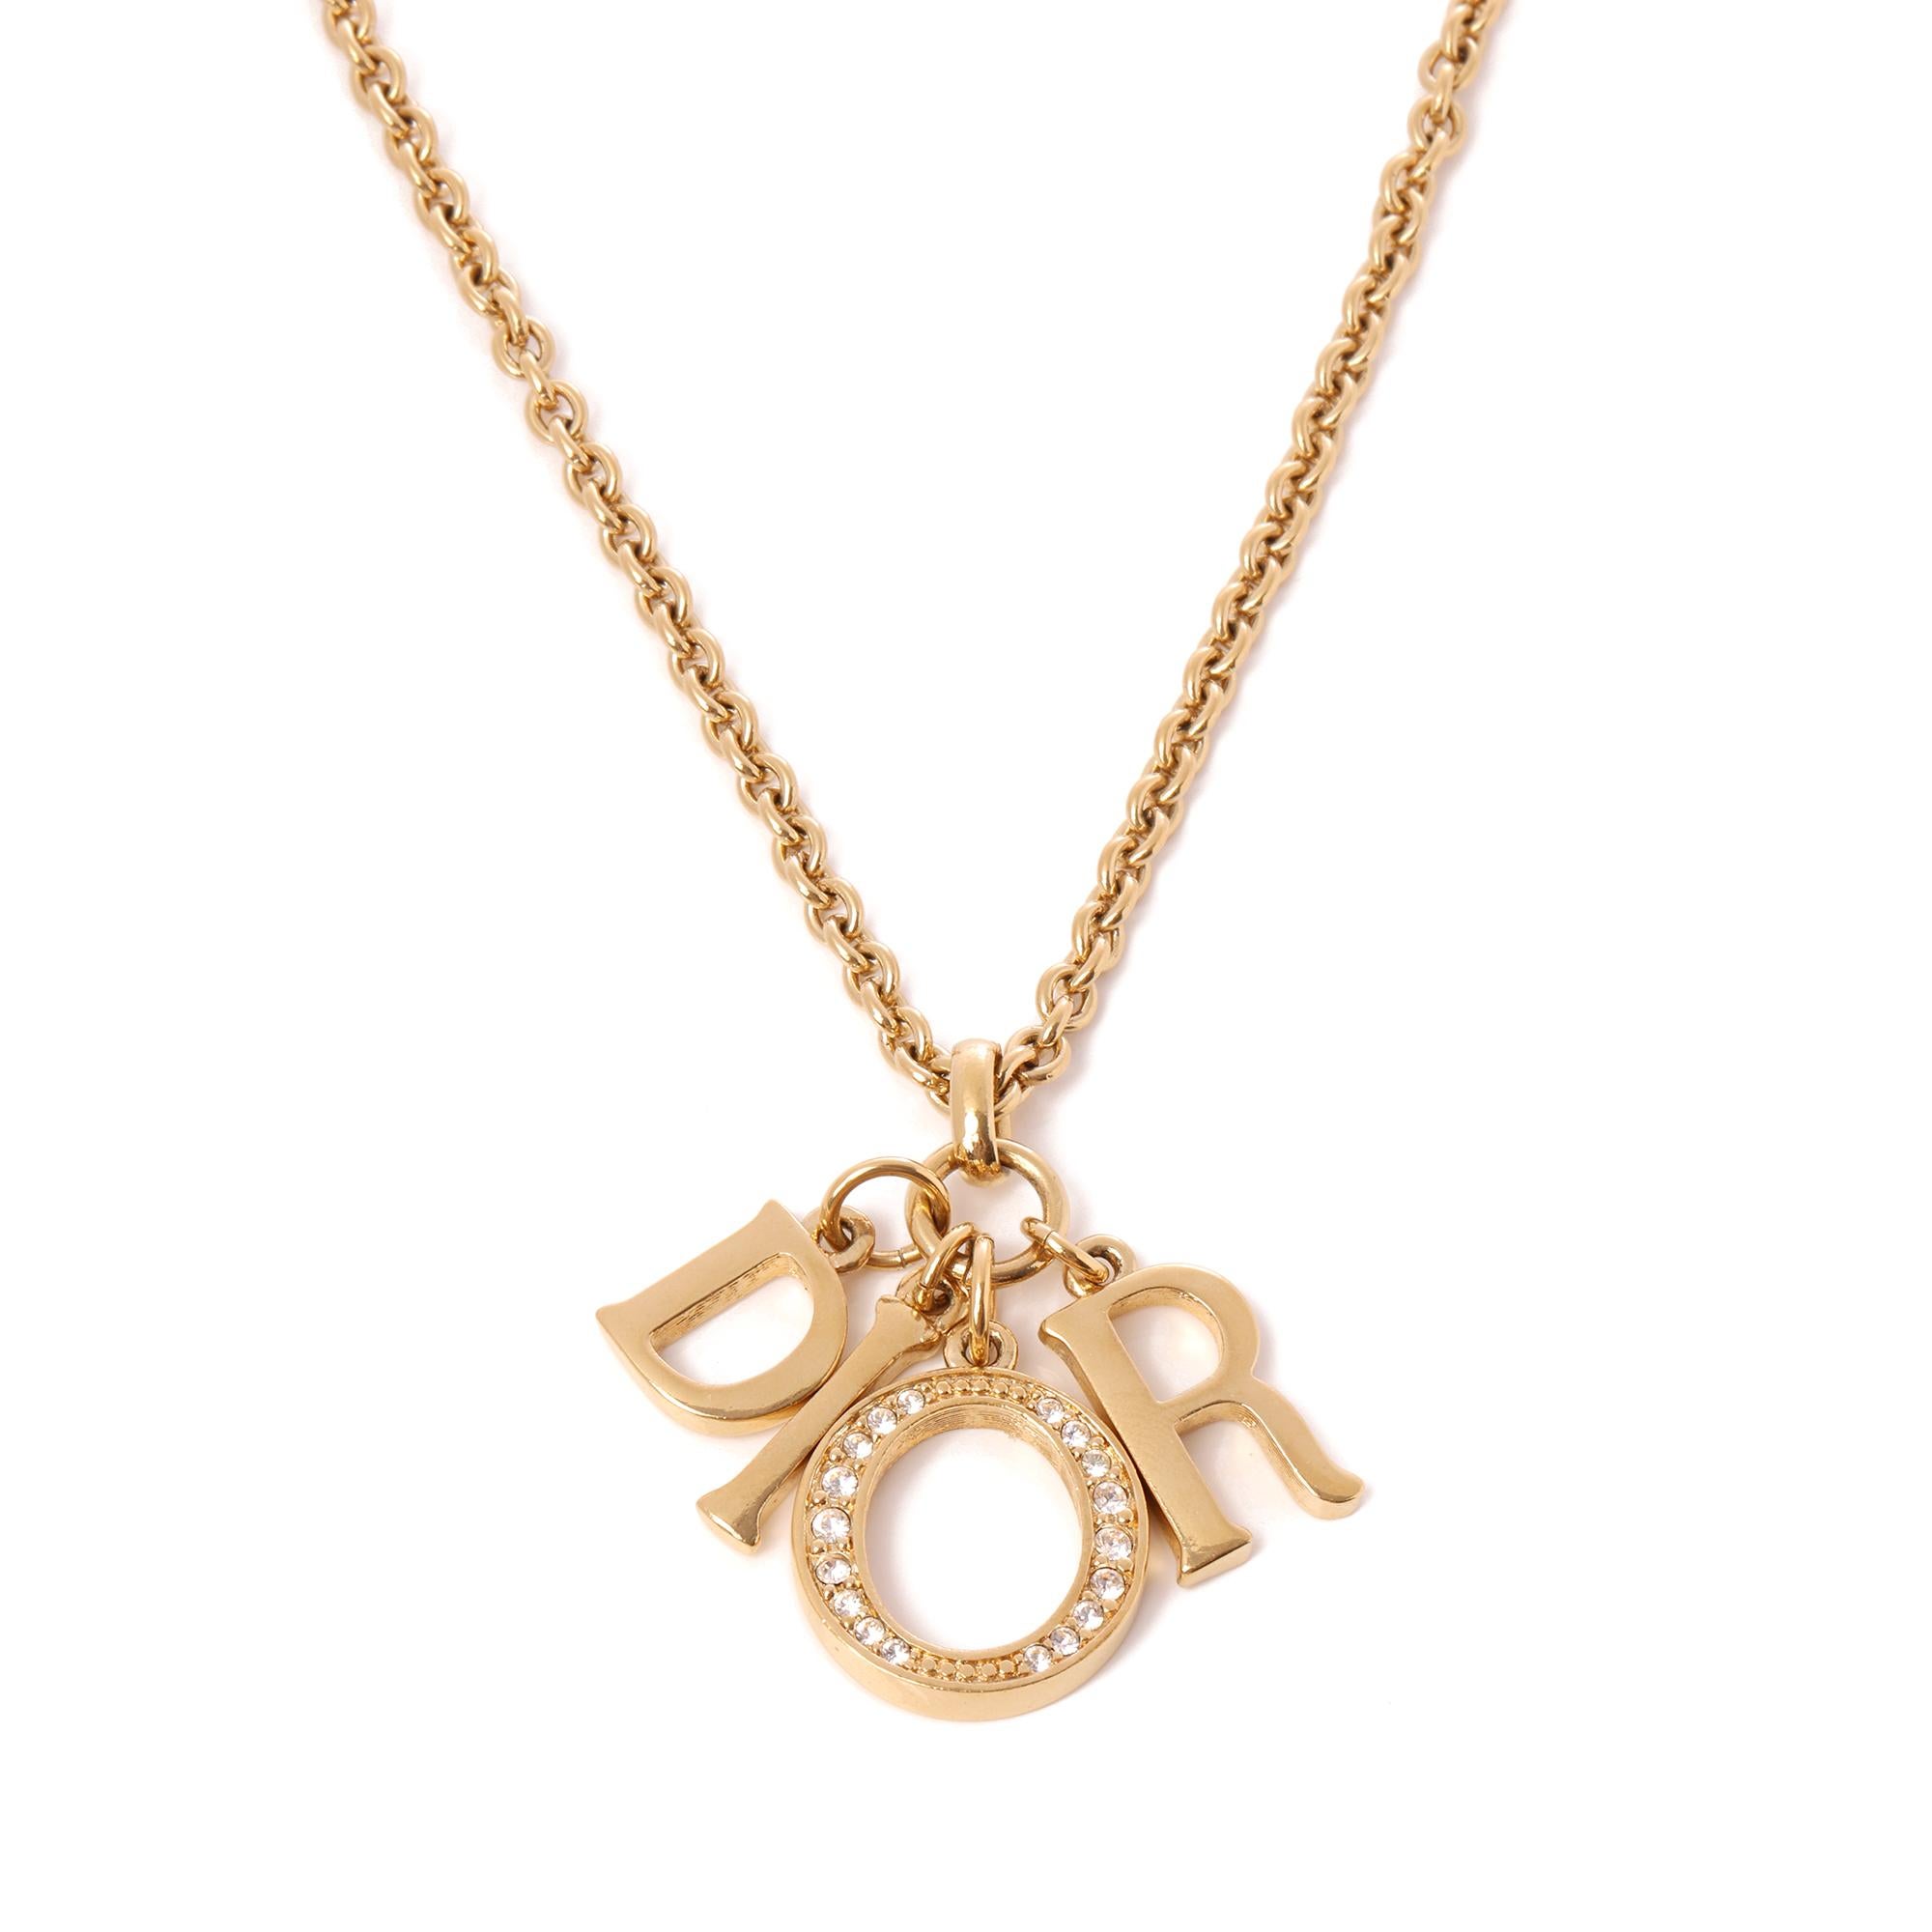 Christian Dior Crystal O Logo Chain Necklace 

ITEM CONDITION	Good
MANUFACTURER	Christian Dior
CHAIN LENGTH	51cm
NECKLACE LENGTH	51cm
PENDANT WIDTH	40mm
PENDANT LENGTH	33mm
CLASP TYPE	Lobster Claw
TOTAL WEIGHT	24g